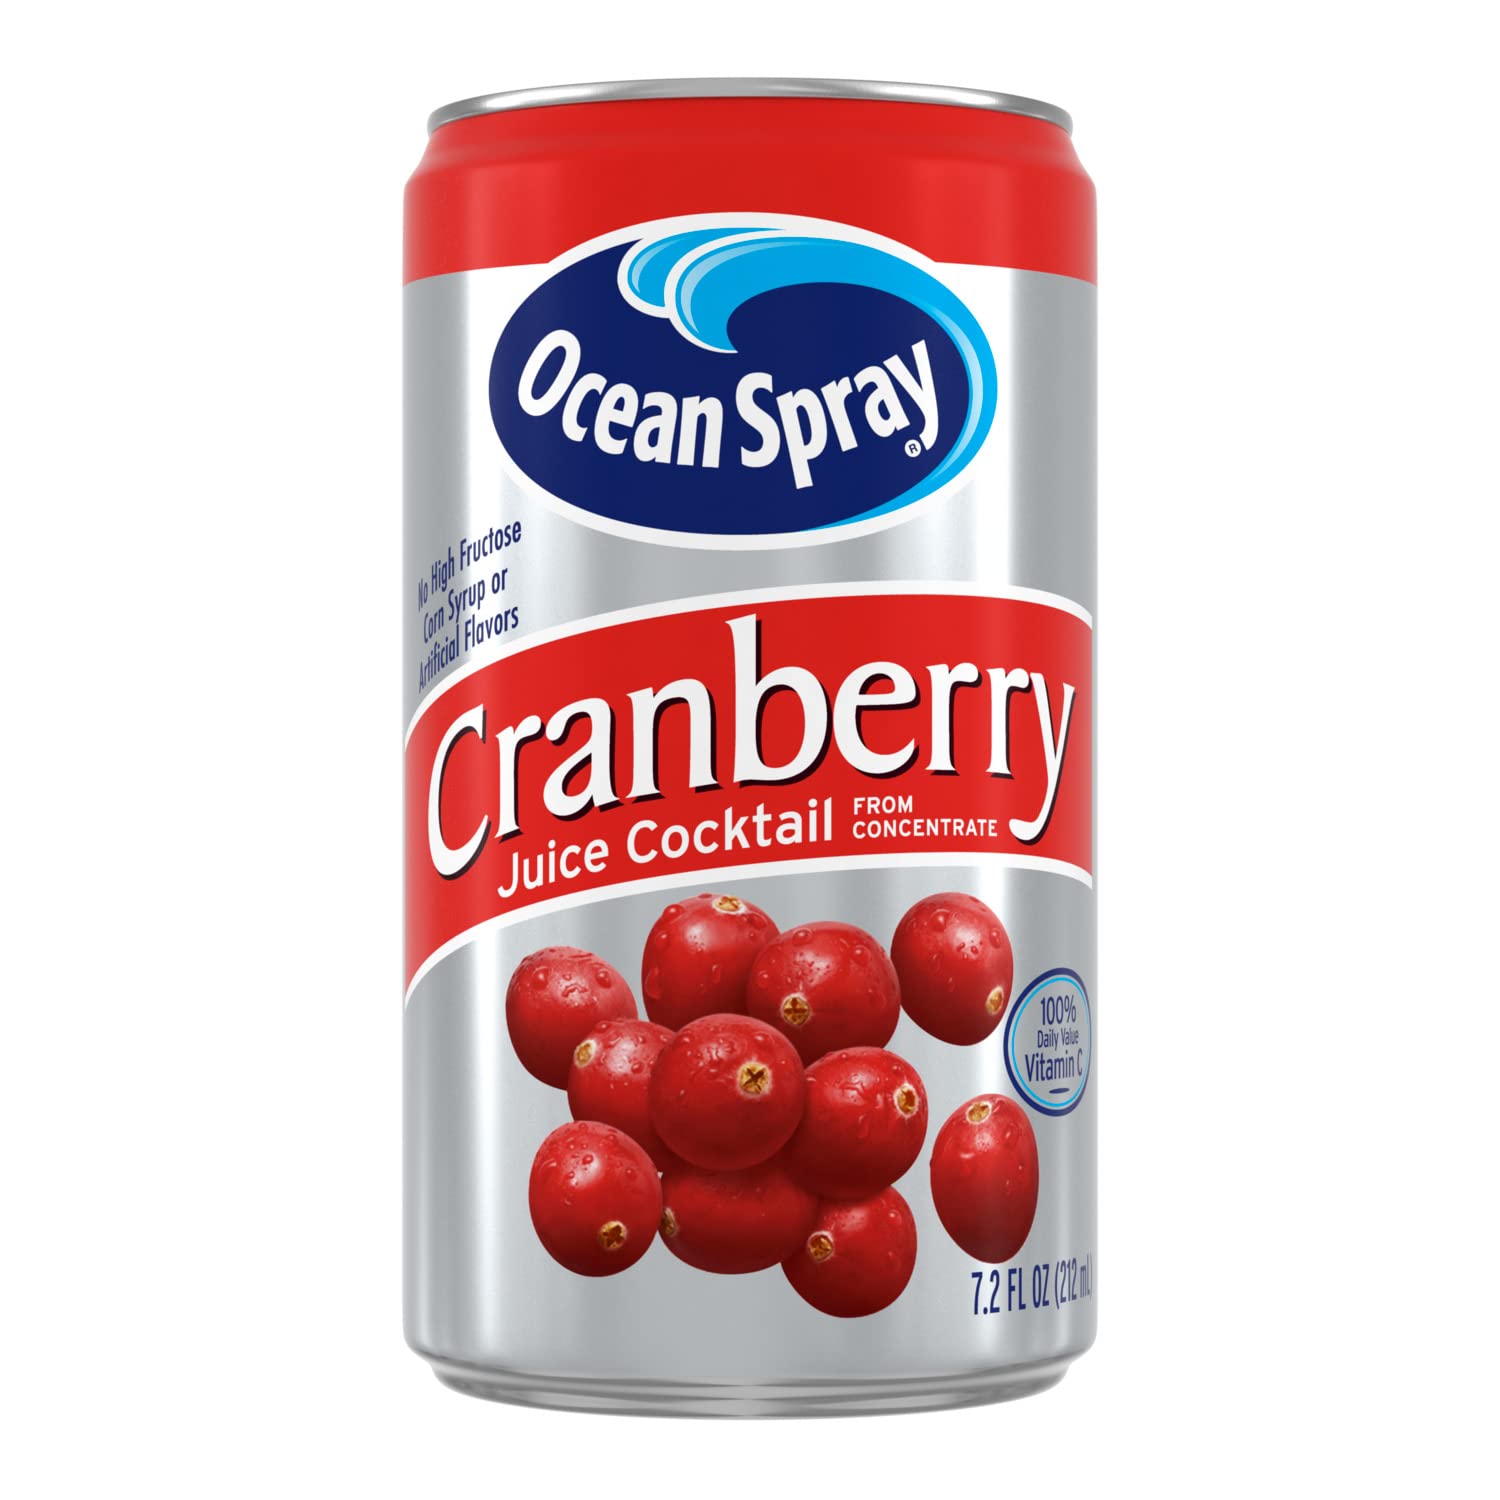 Ocean Spray Cranberry Juice Cocktail, 7.2 Oz Cans (Pack Of 24 ...